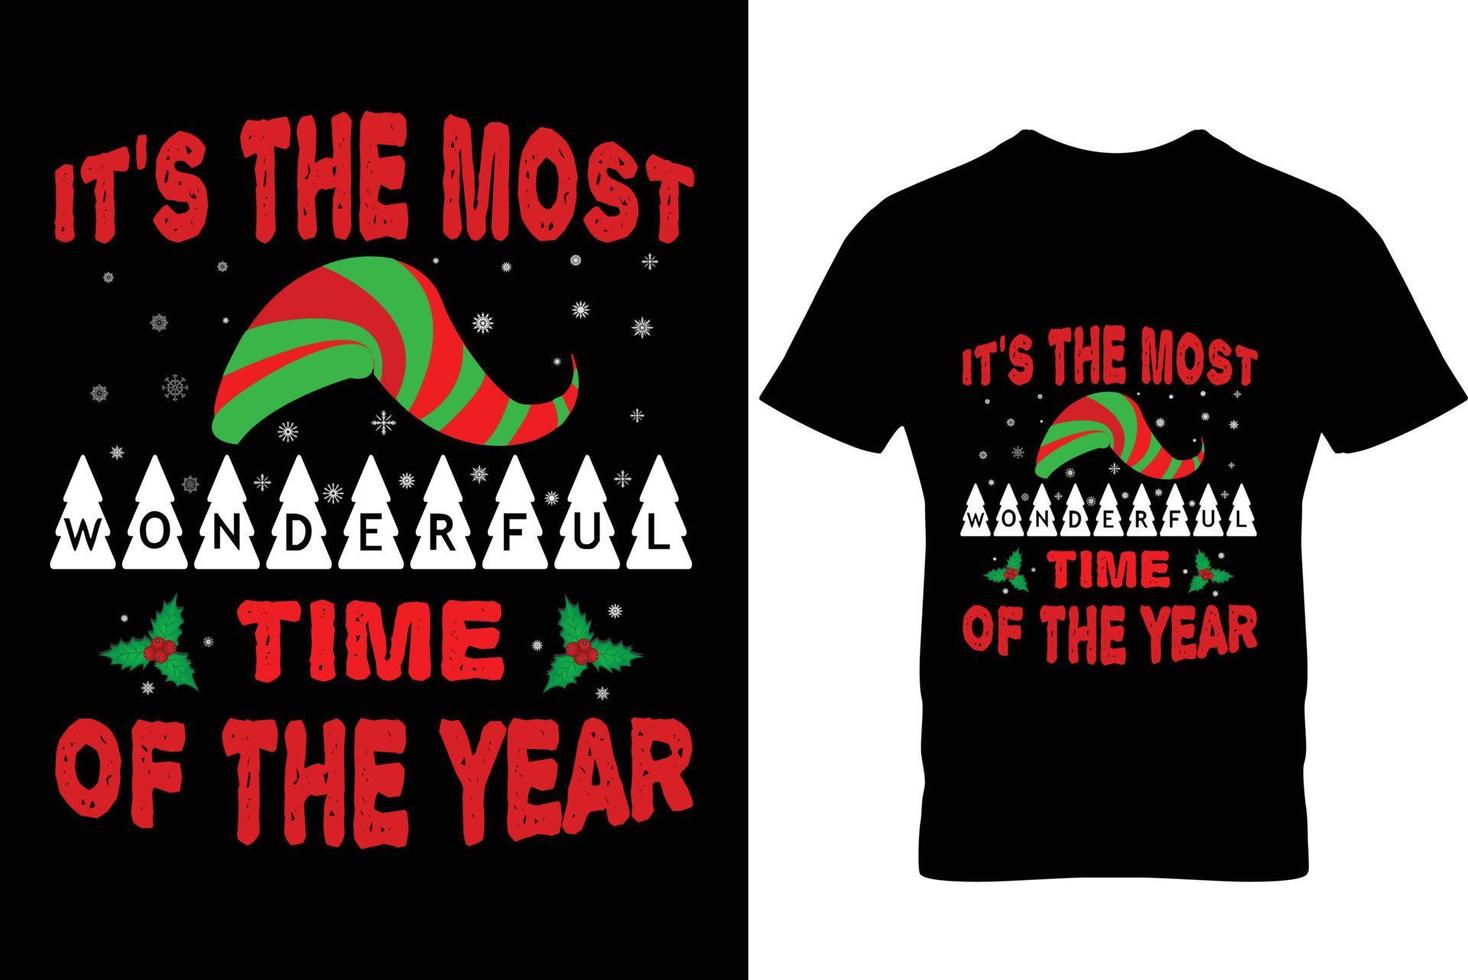 Christmas t shirt design it's the most wonderful time of the year vector